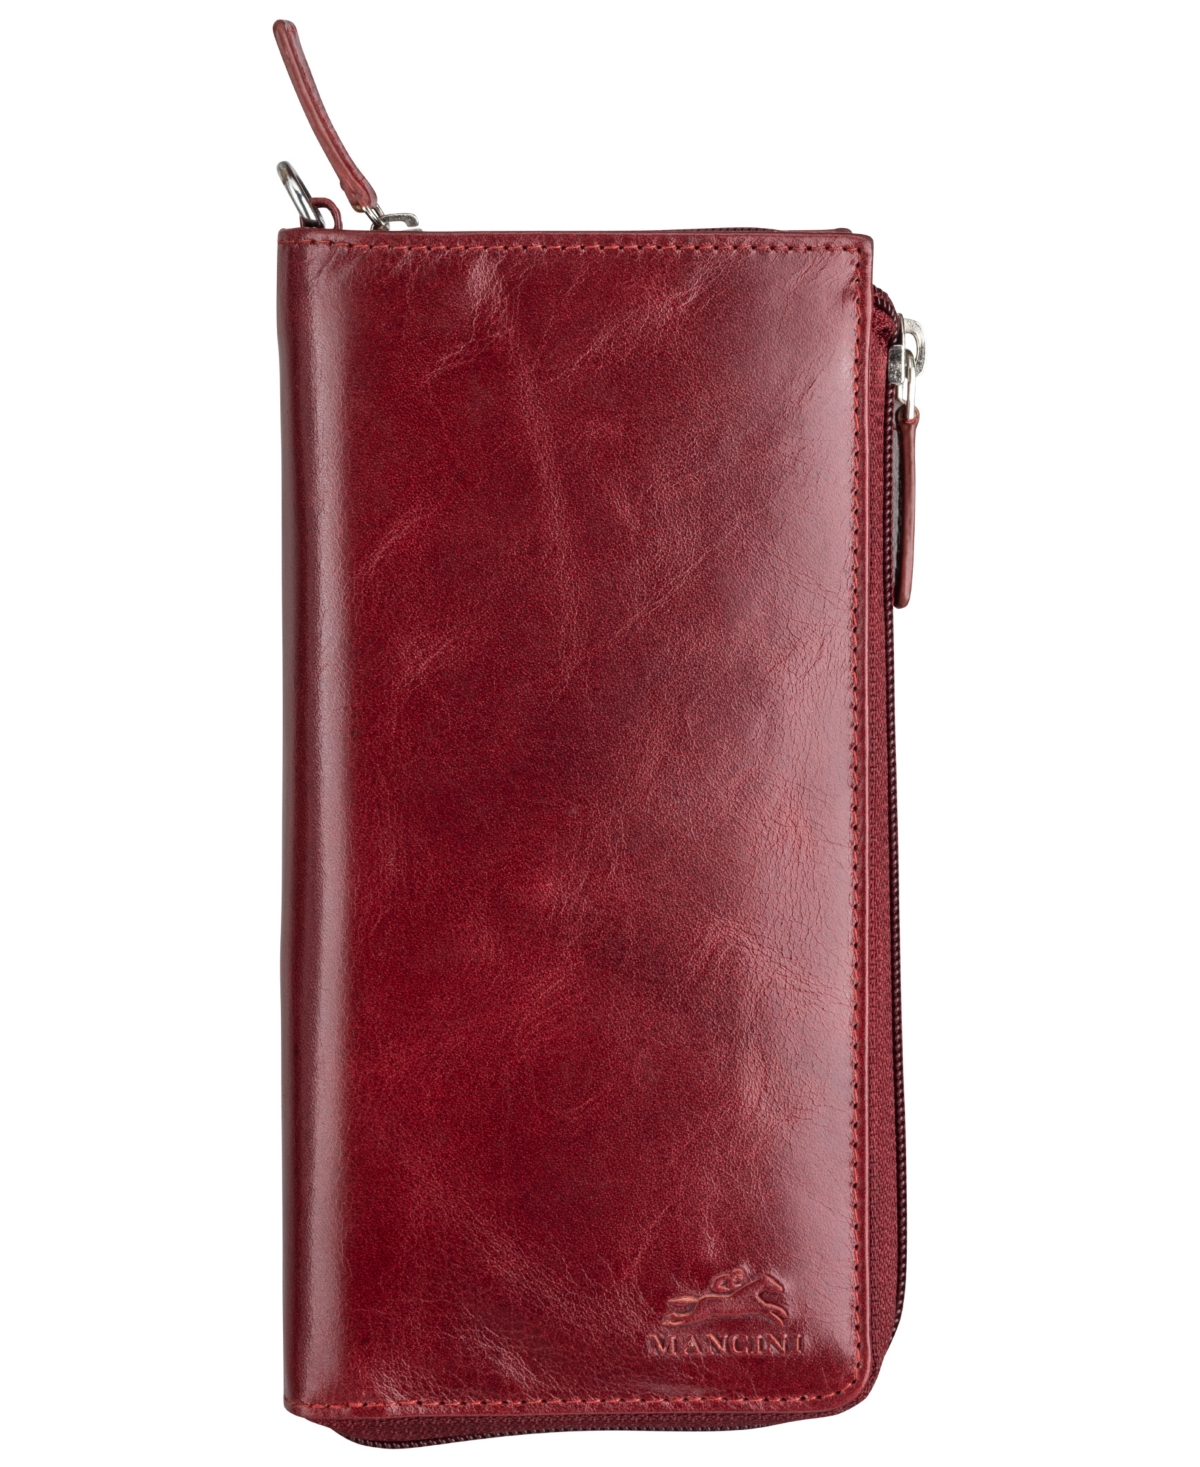 Mancini Men's Casablanca Collection Trifold Wallet In Red